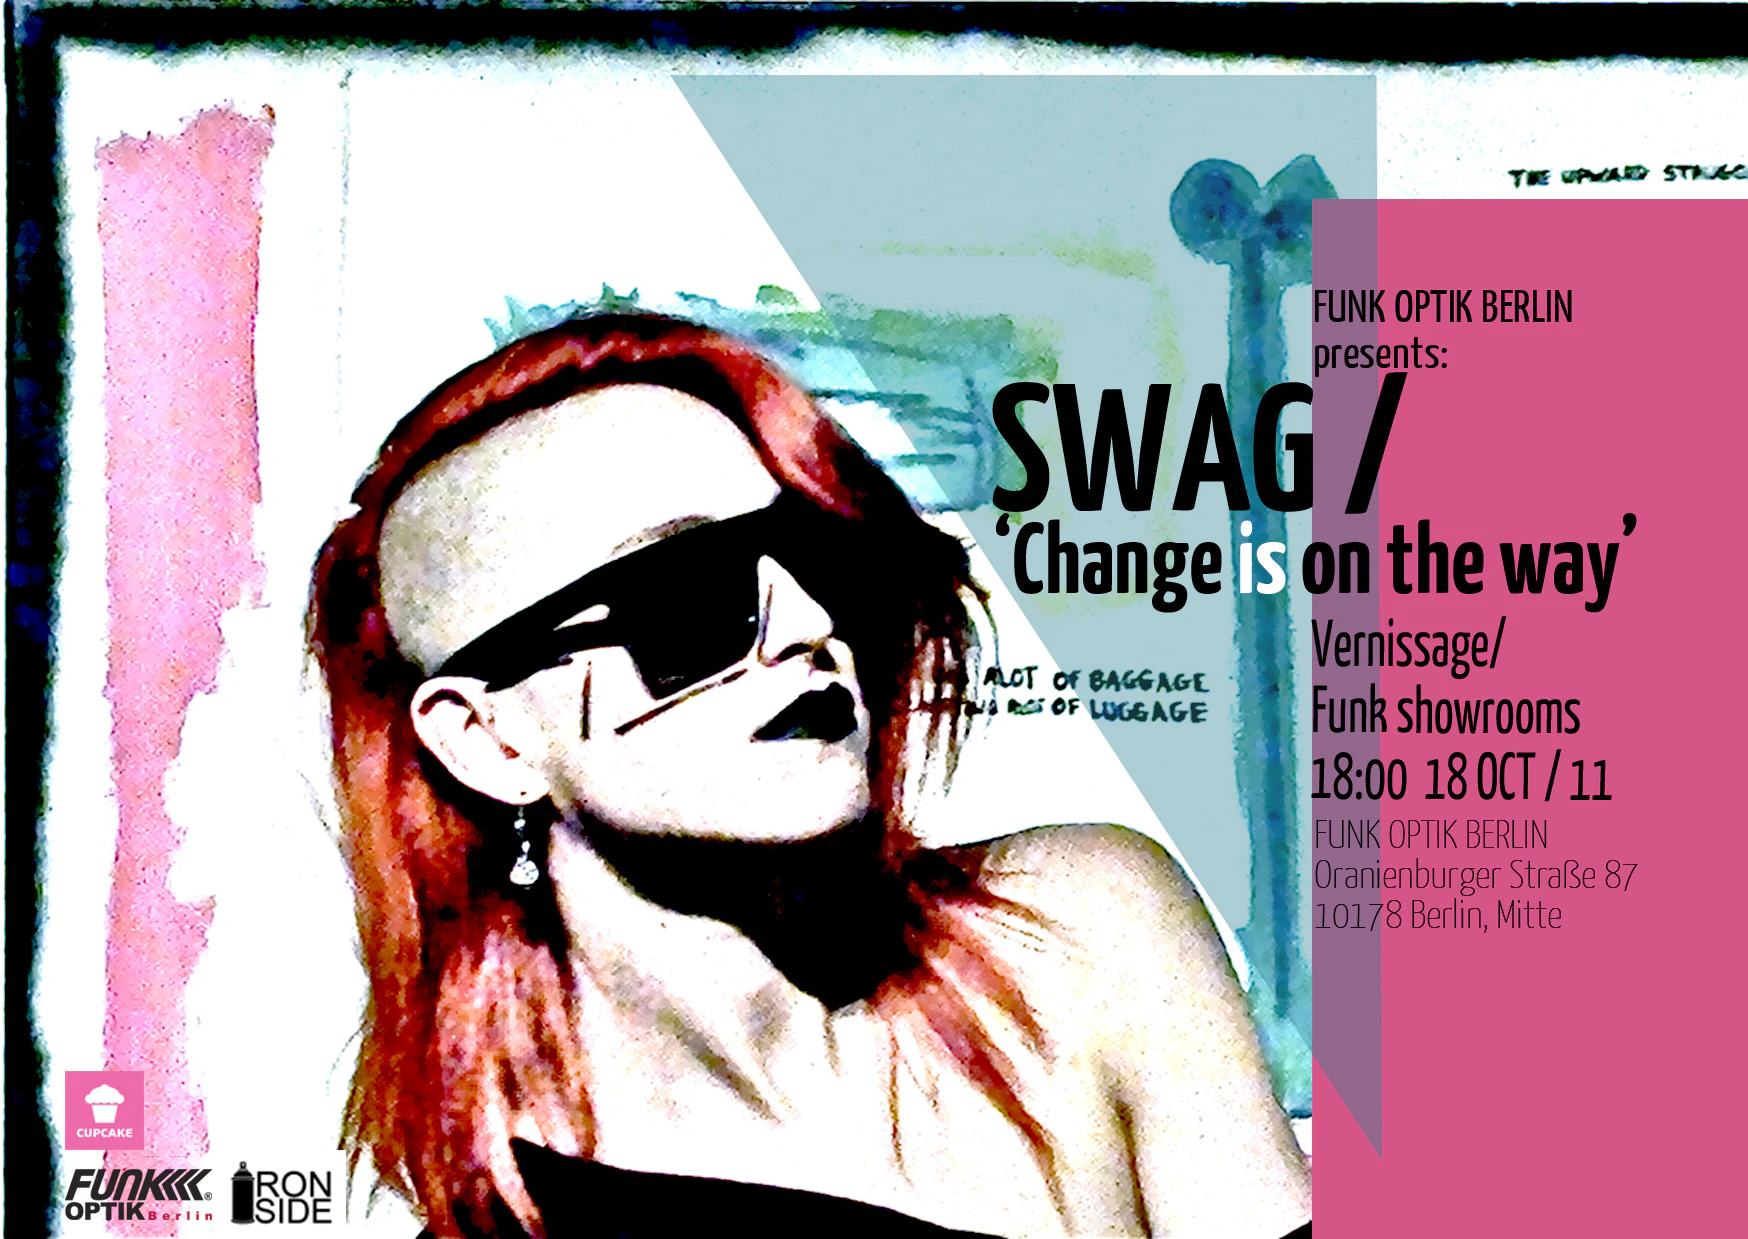 SWag / Change is on the way